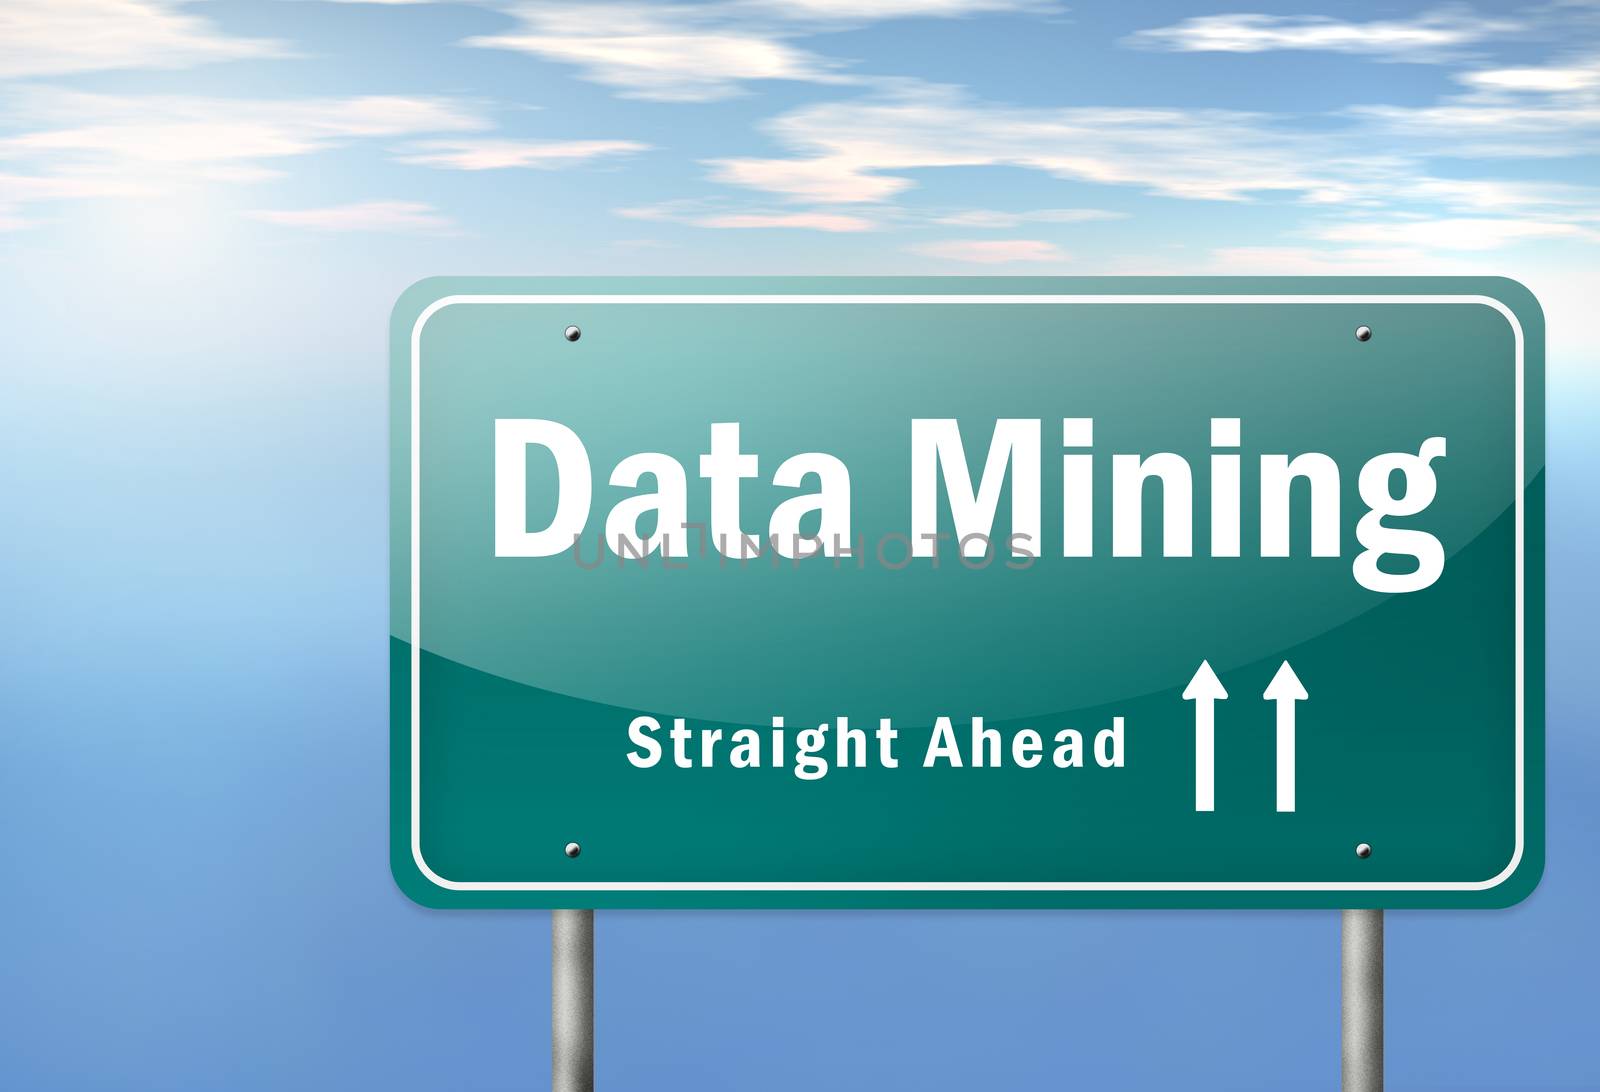 Highway Signpost "Data Mining" by mindscanner